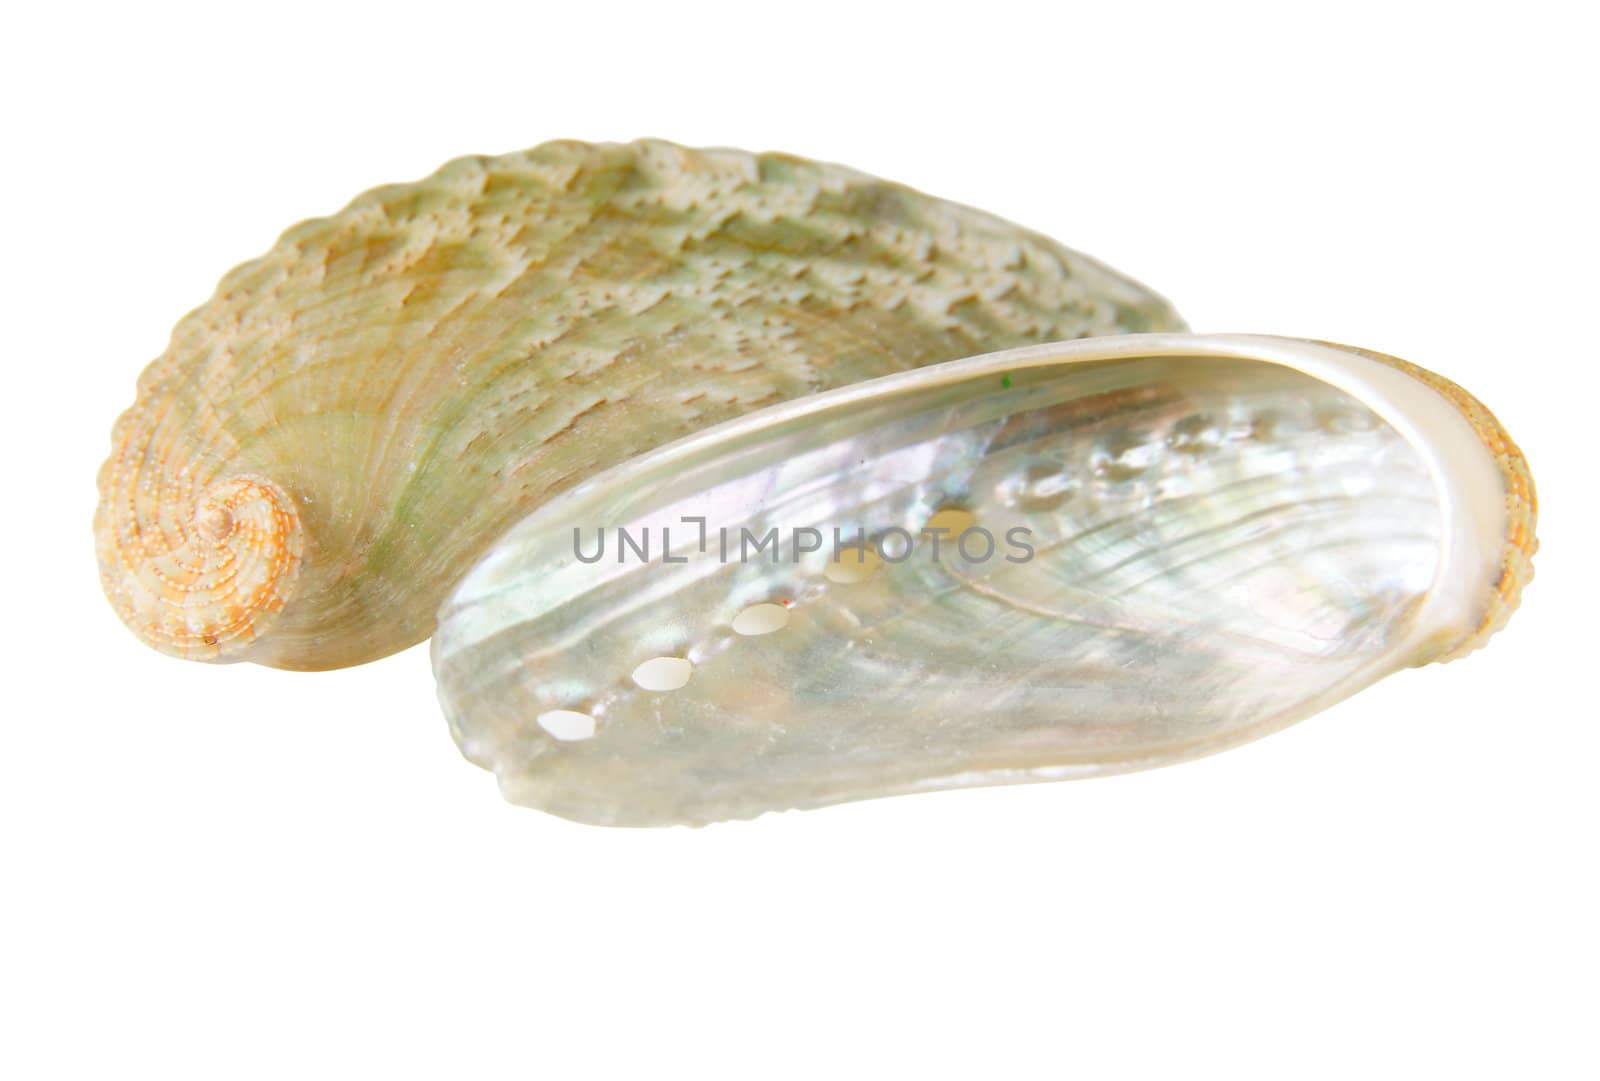 White-pearl sea shell close-up isolated on white